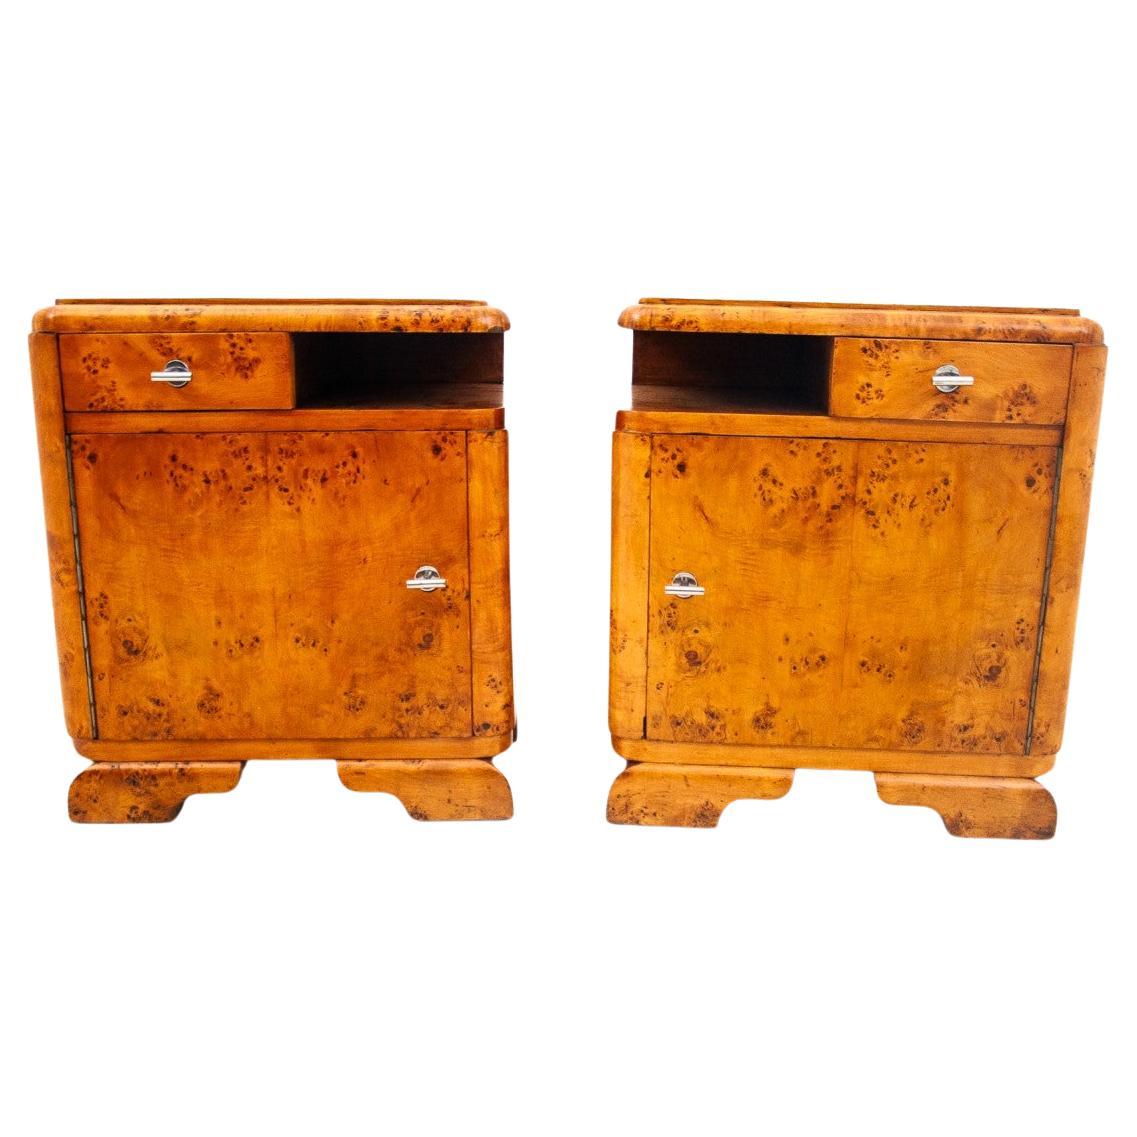 A pair of vintage bedside tables, Poland, 1950s.